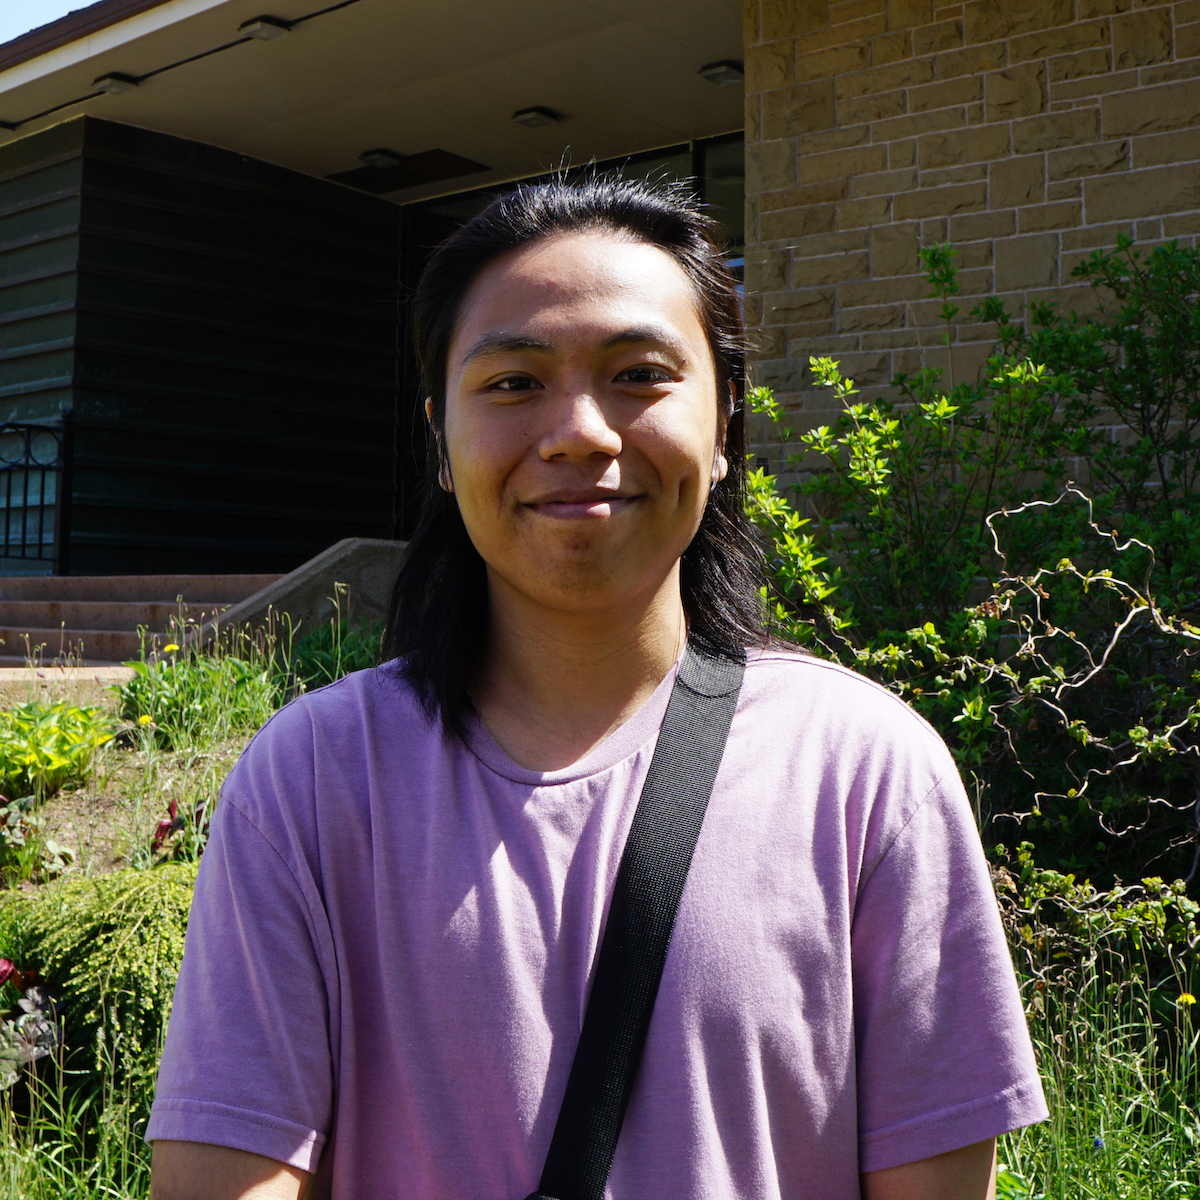 Ranz stands smiling, wearing a pink T-shirt and cross body bag, in front of the Owens. The garden behind him is thriving with leafy green plants and small yellow flowers.